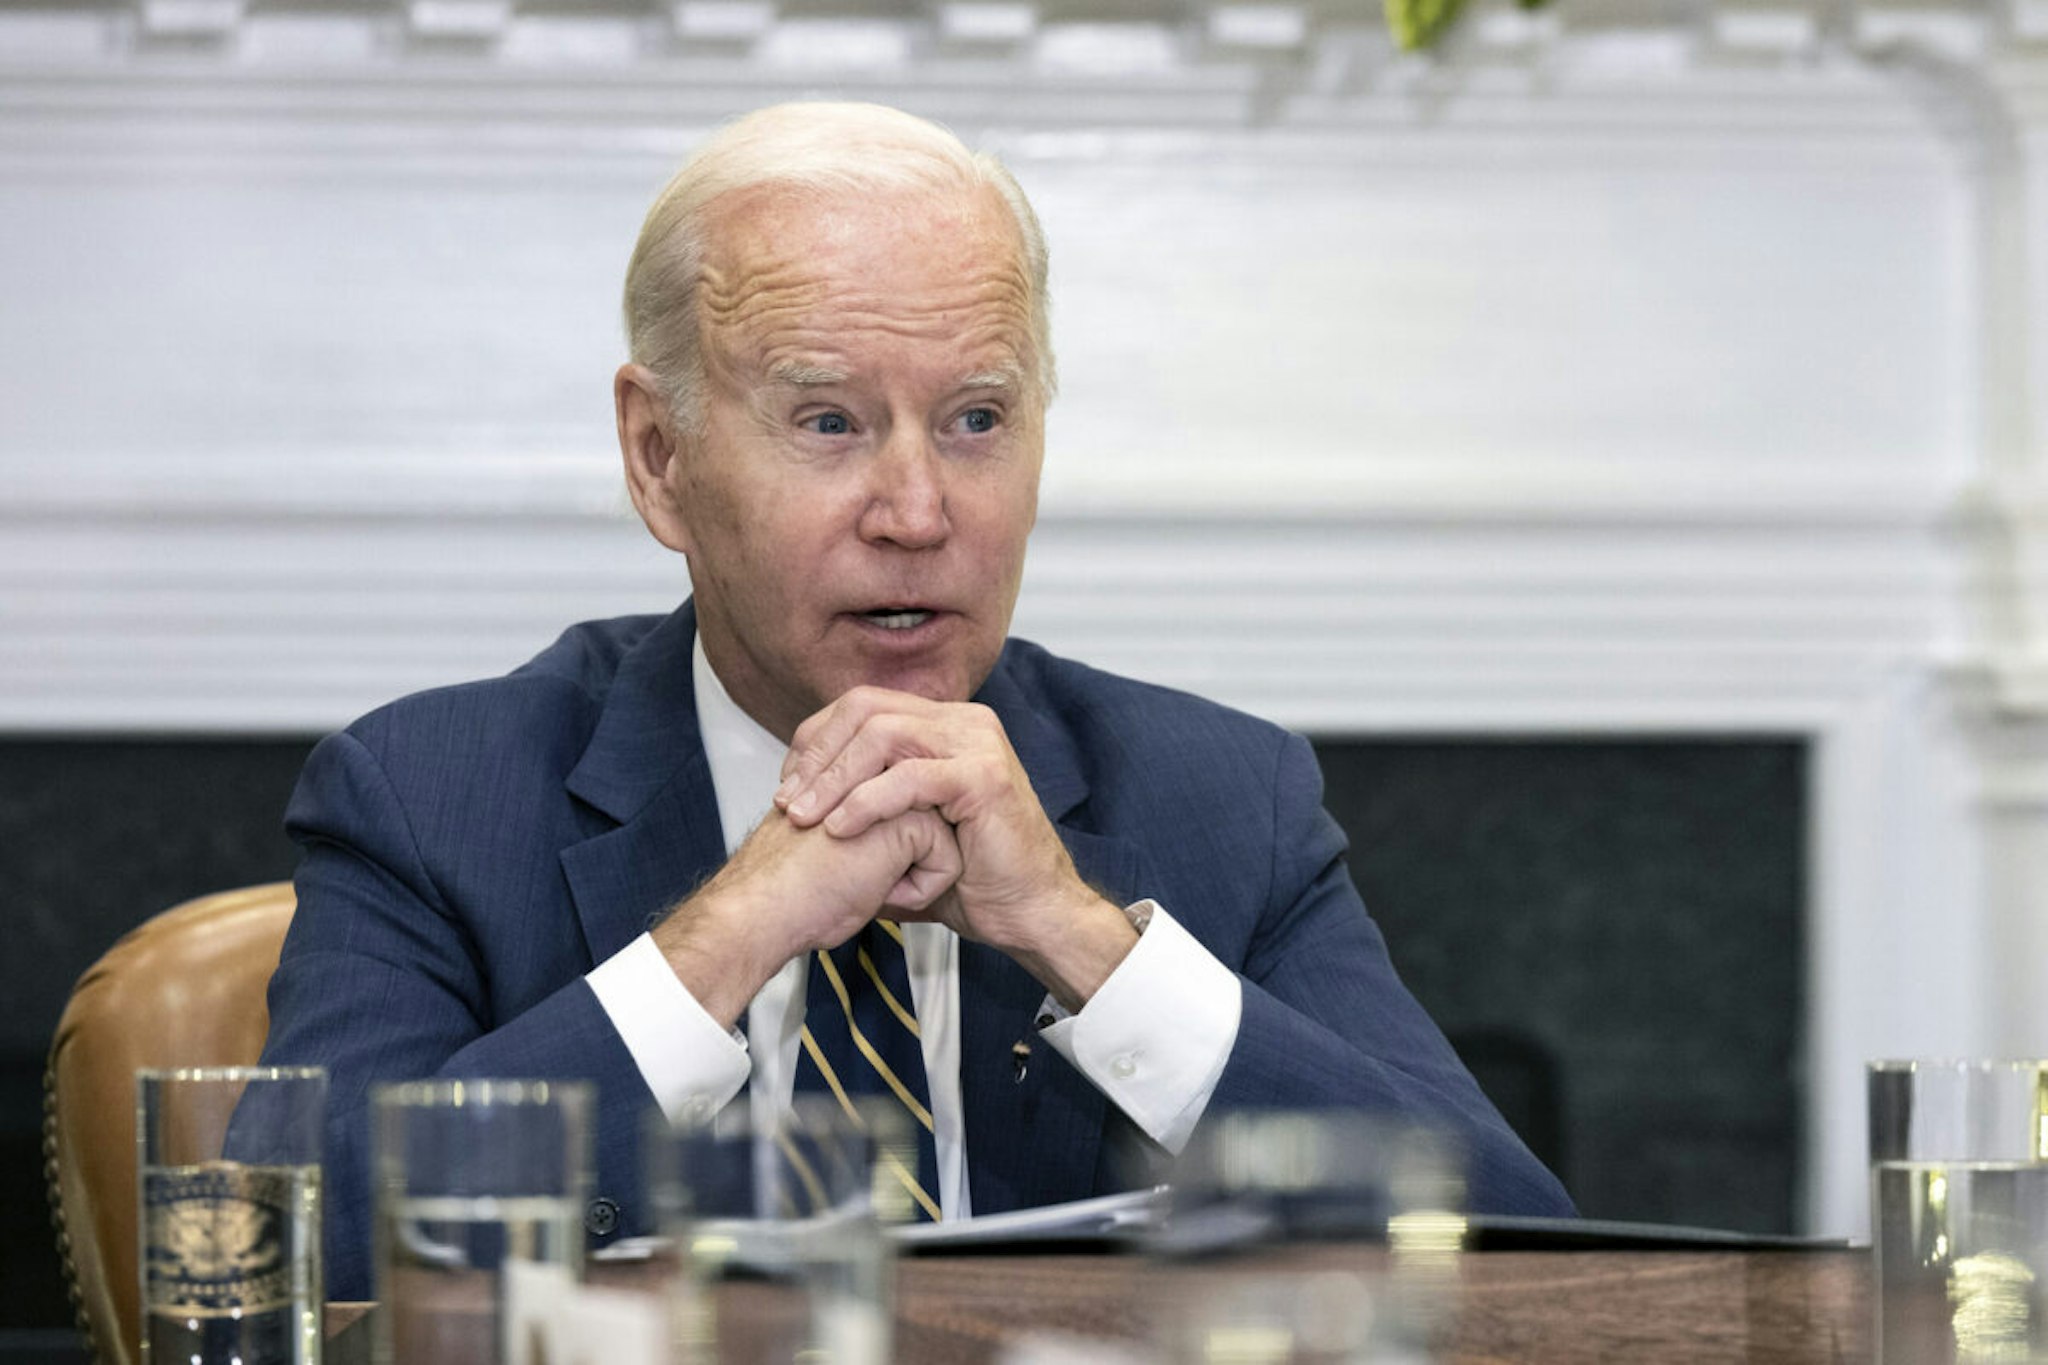 U.S. President Joe Biden meets with Congressional Leaders to discuss legislative priorities through the end of 2022, at the White House on November 29, 2022 in Washington, DC.